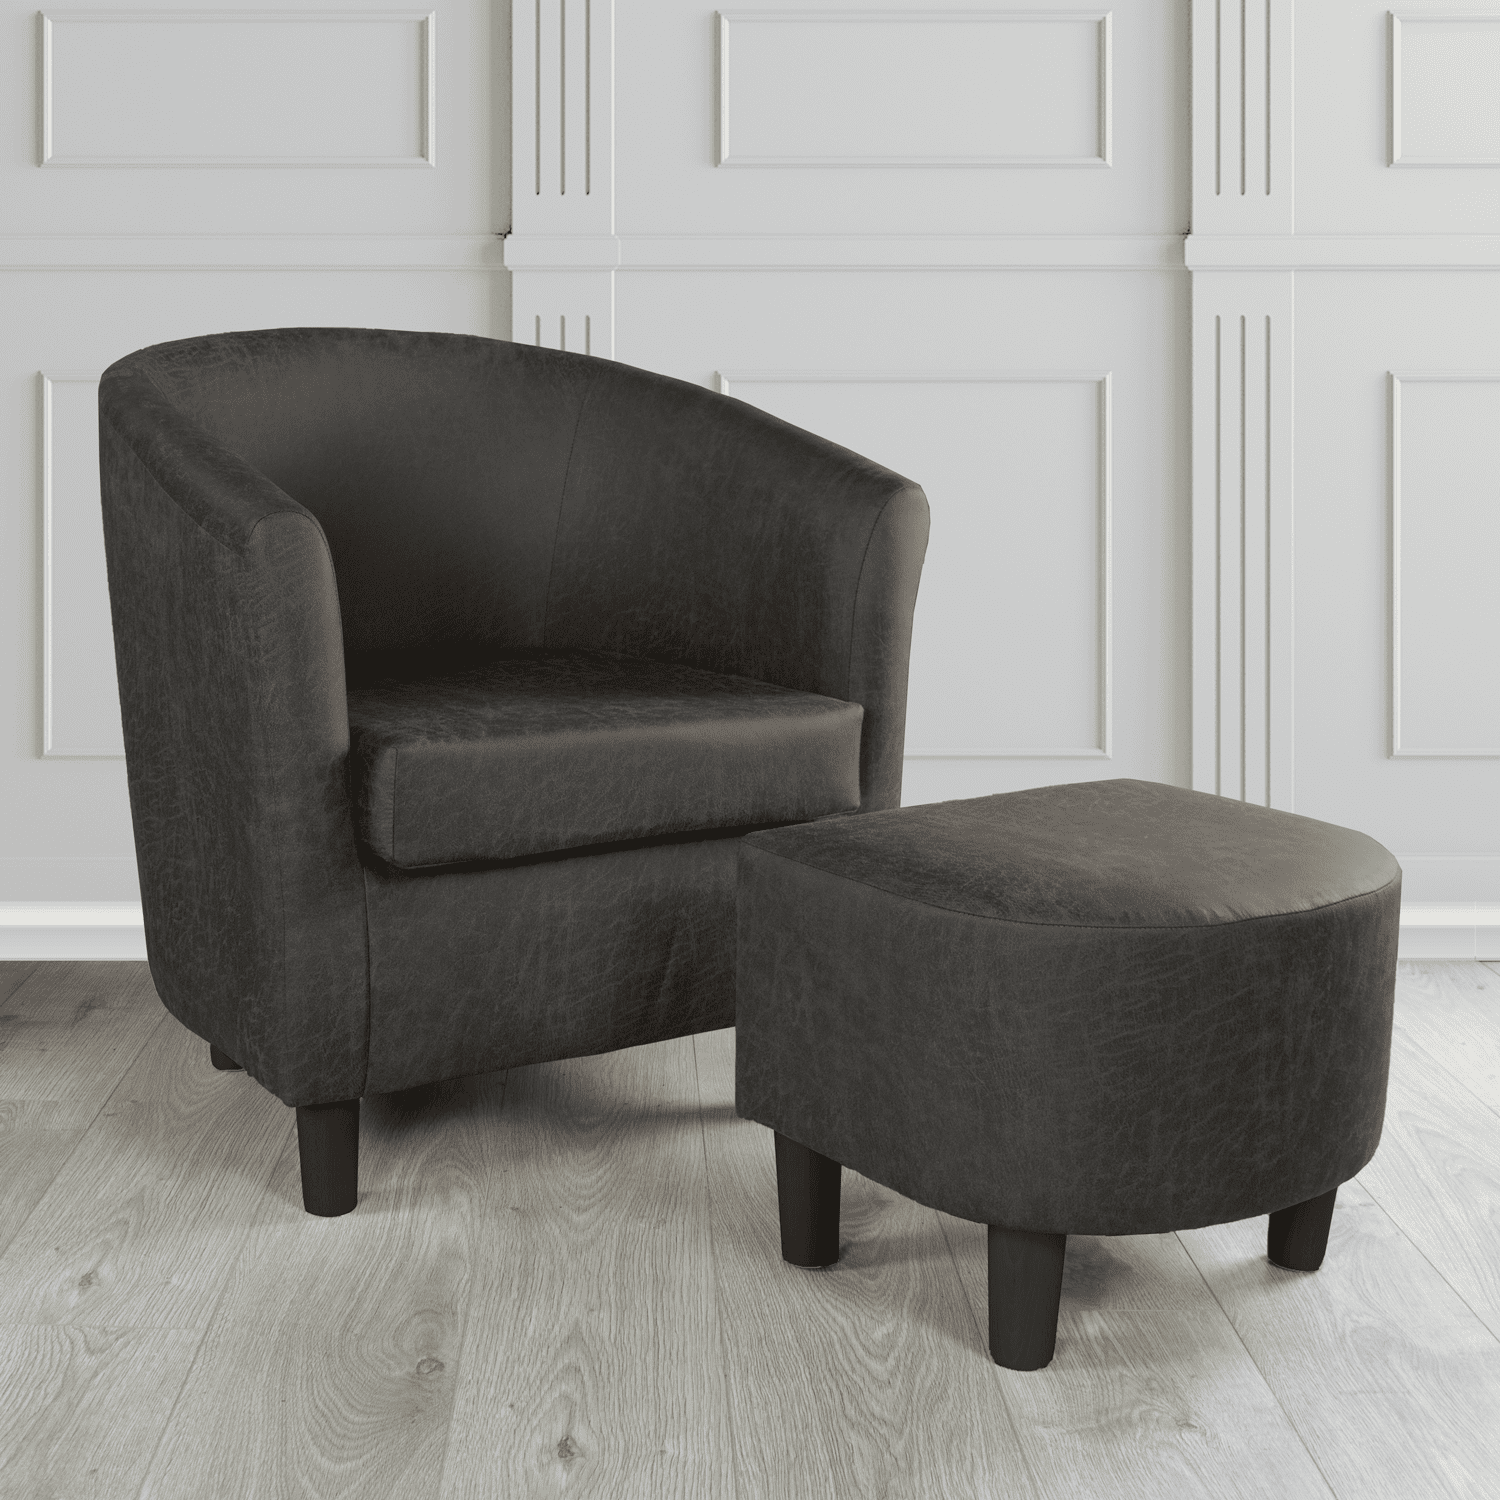 Tuscany Nevada Black Faux Leather Tub Chair with Dee Footstool Set - The Tub Chair Shop